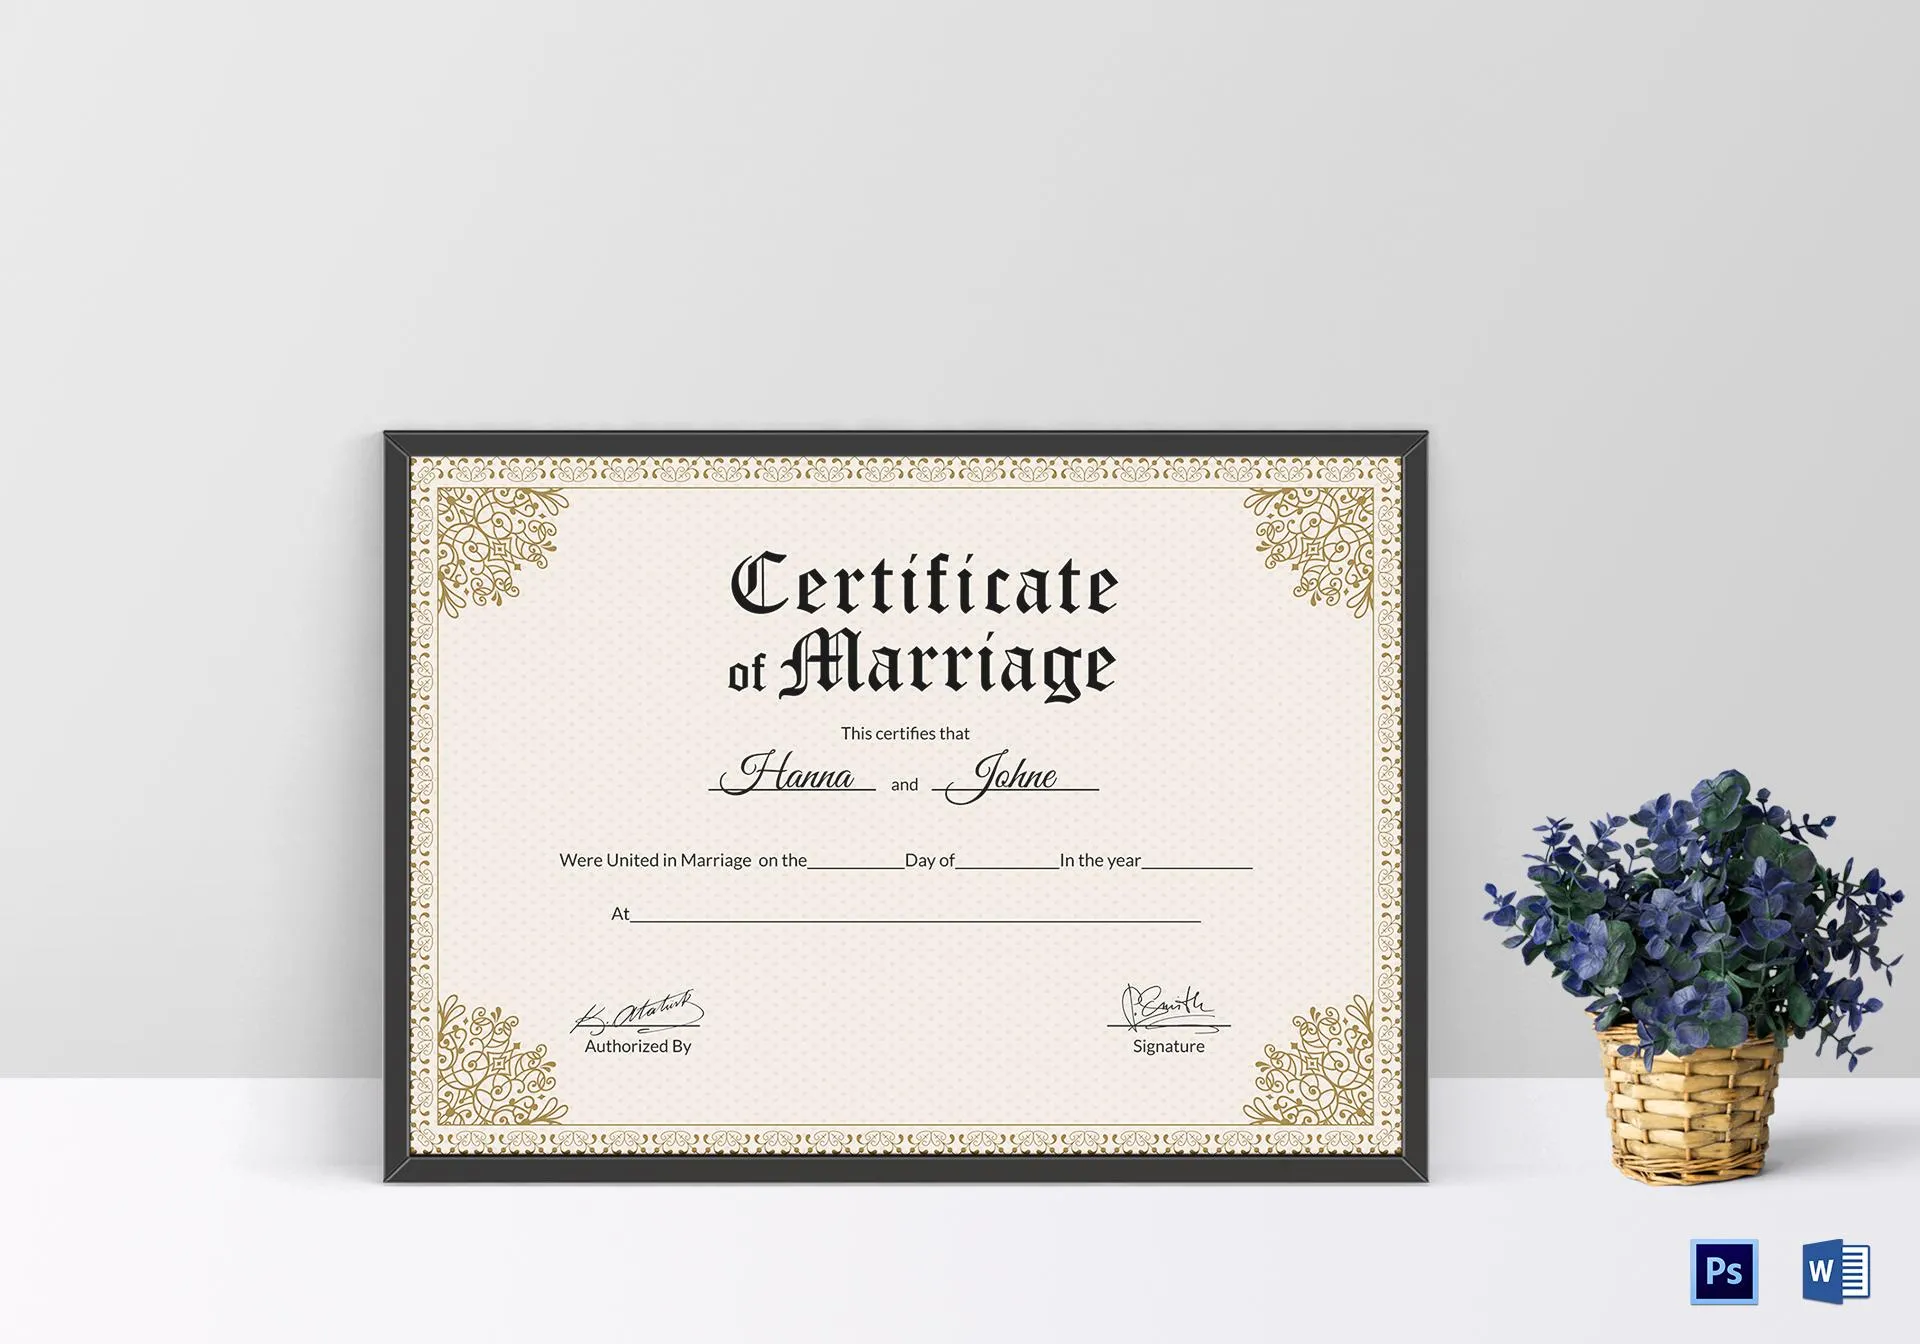 Renewing vows marriage certificate form pdf.